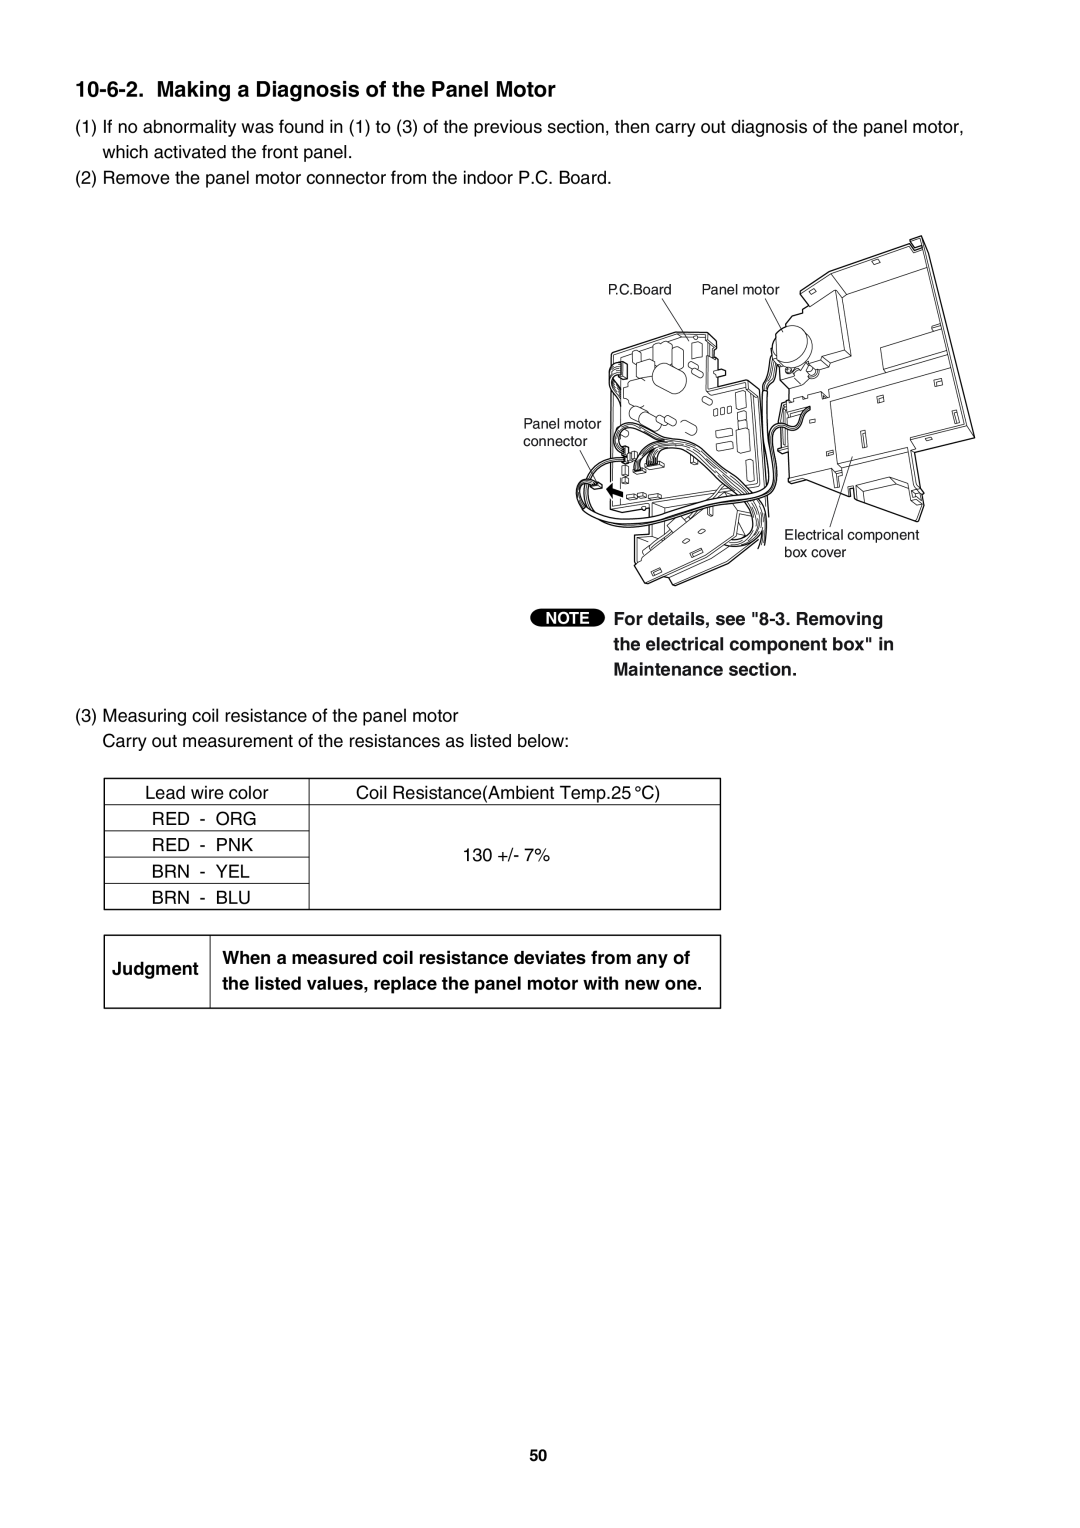 Sanyo SAP-KRV94EHDX service manual Making a Diagnosis of the Panel Motor, Judgment 